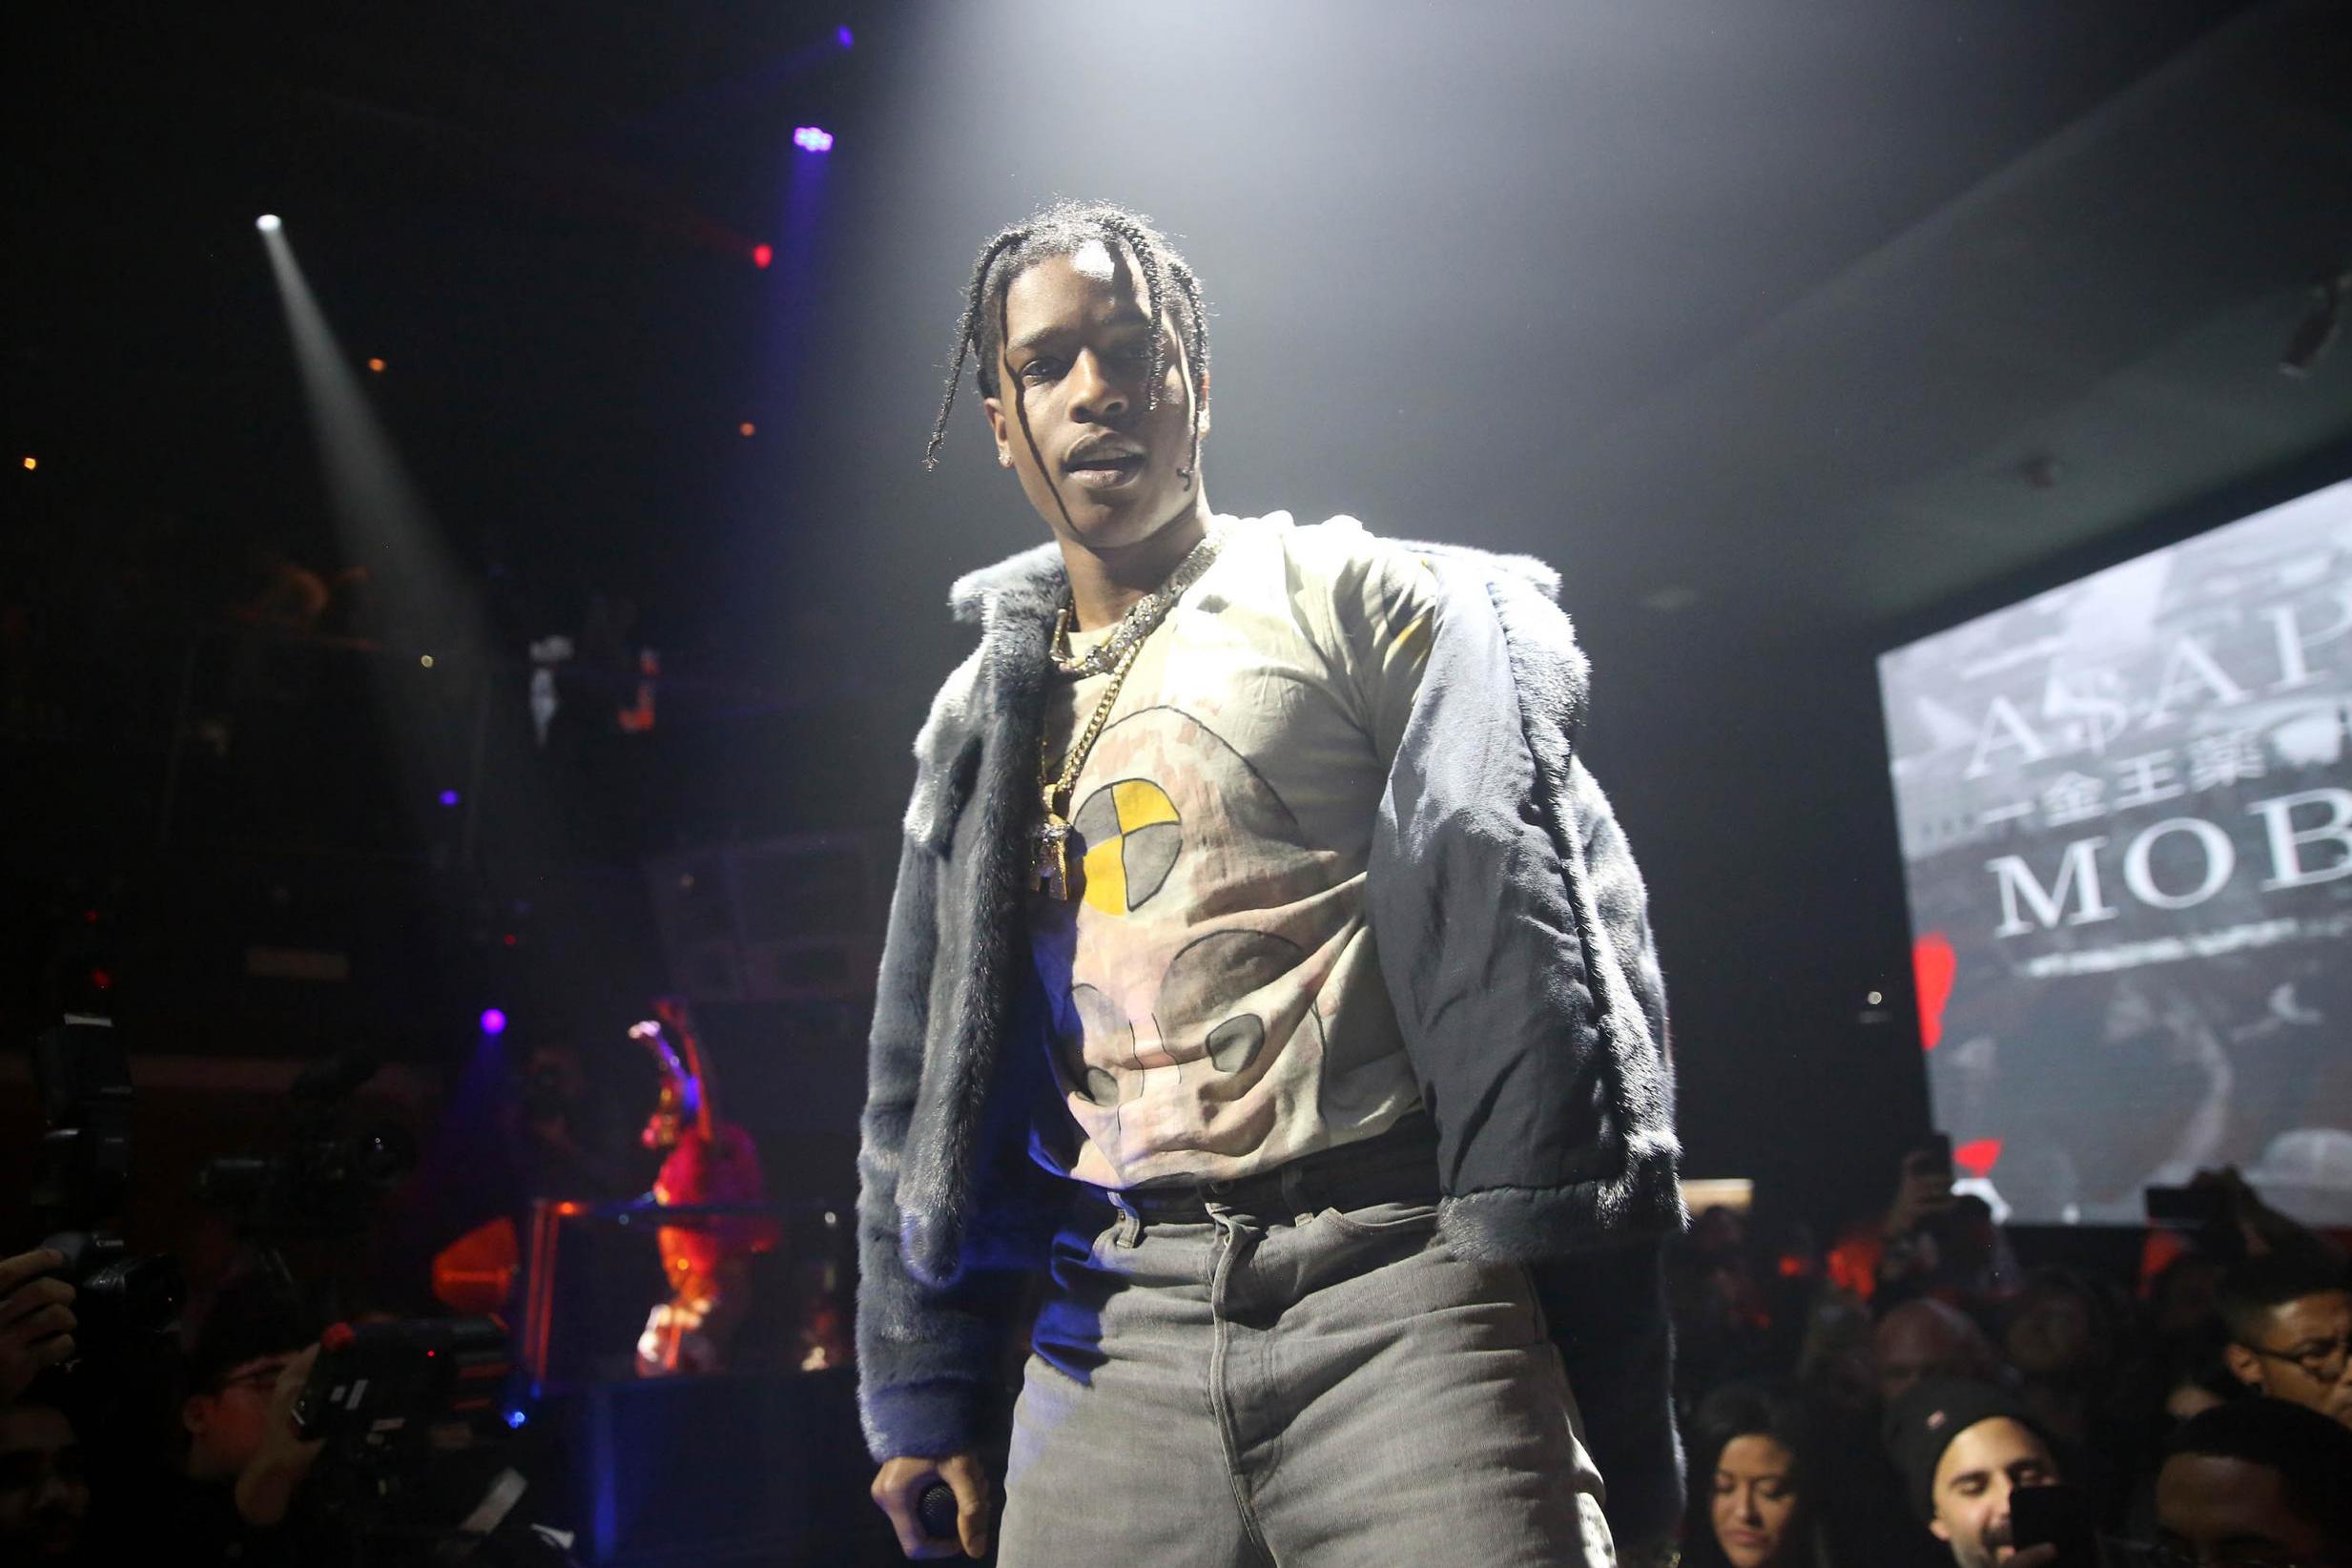 A$AP Rocky has been charged with assault after a fight in Stockholm, Sweden